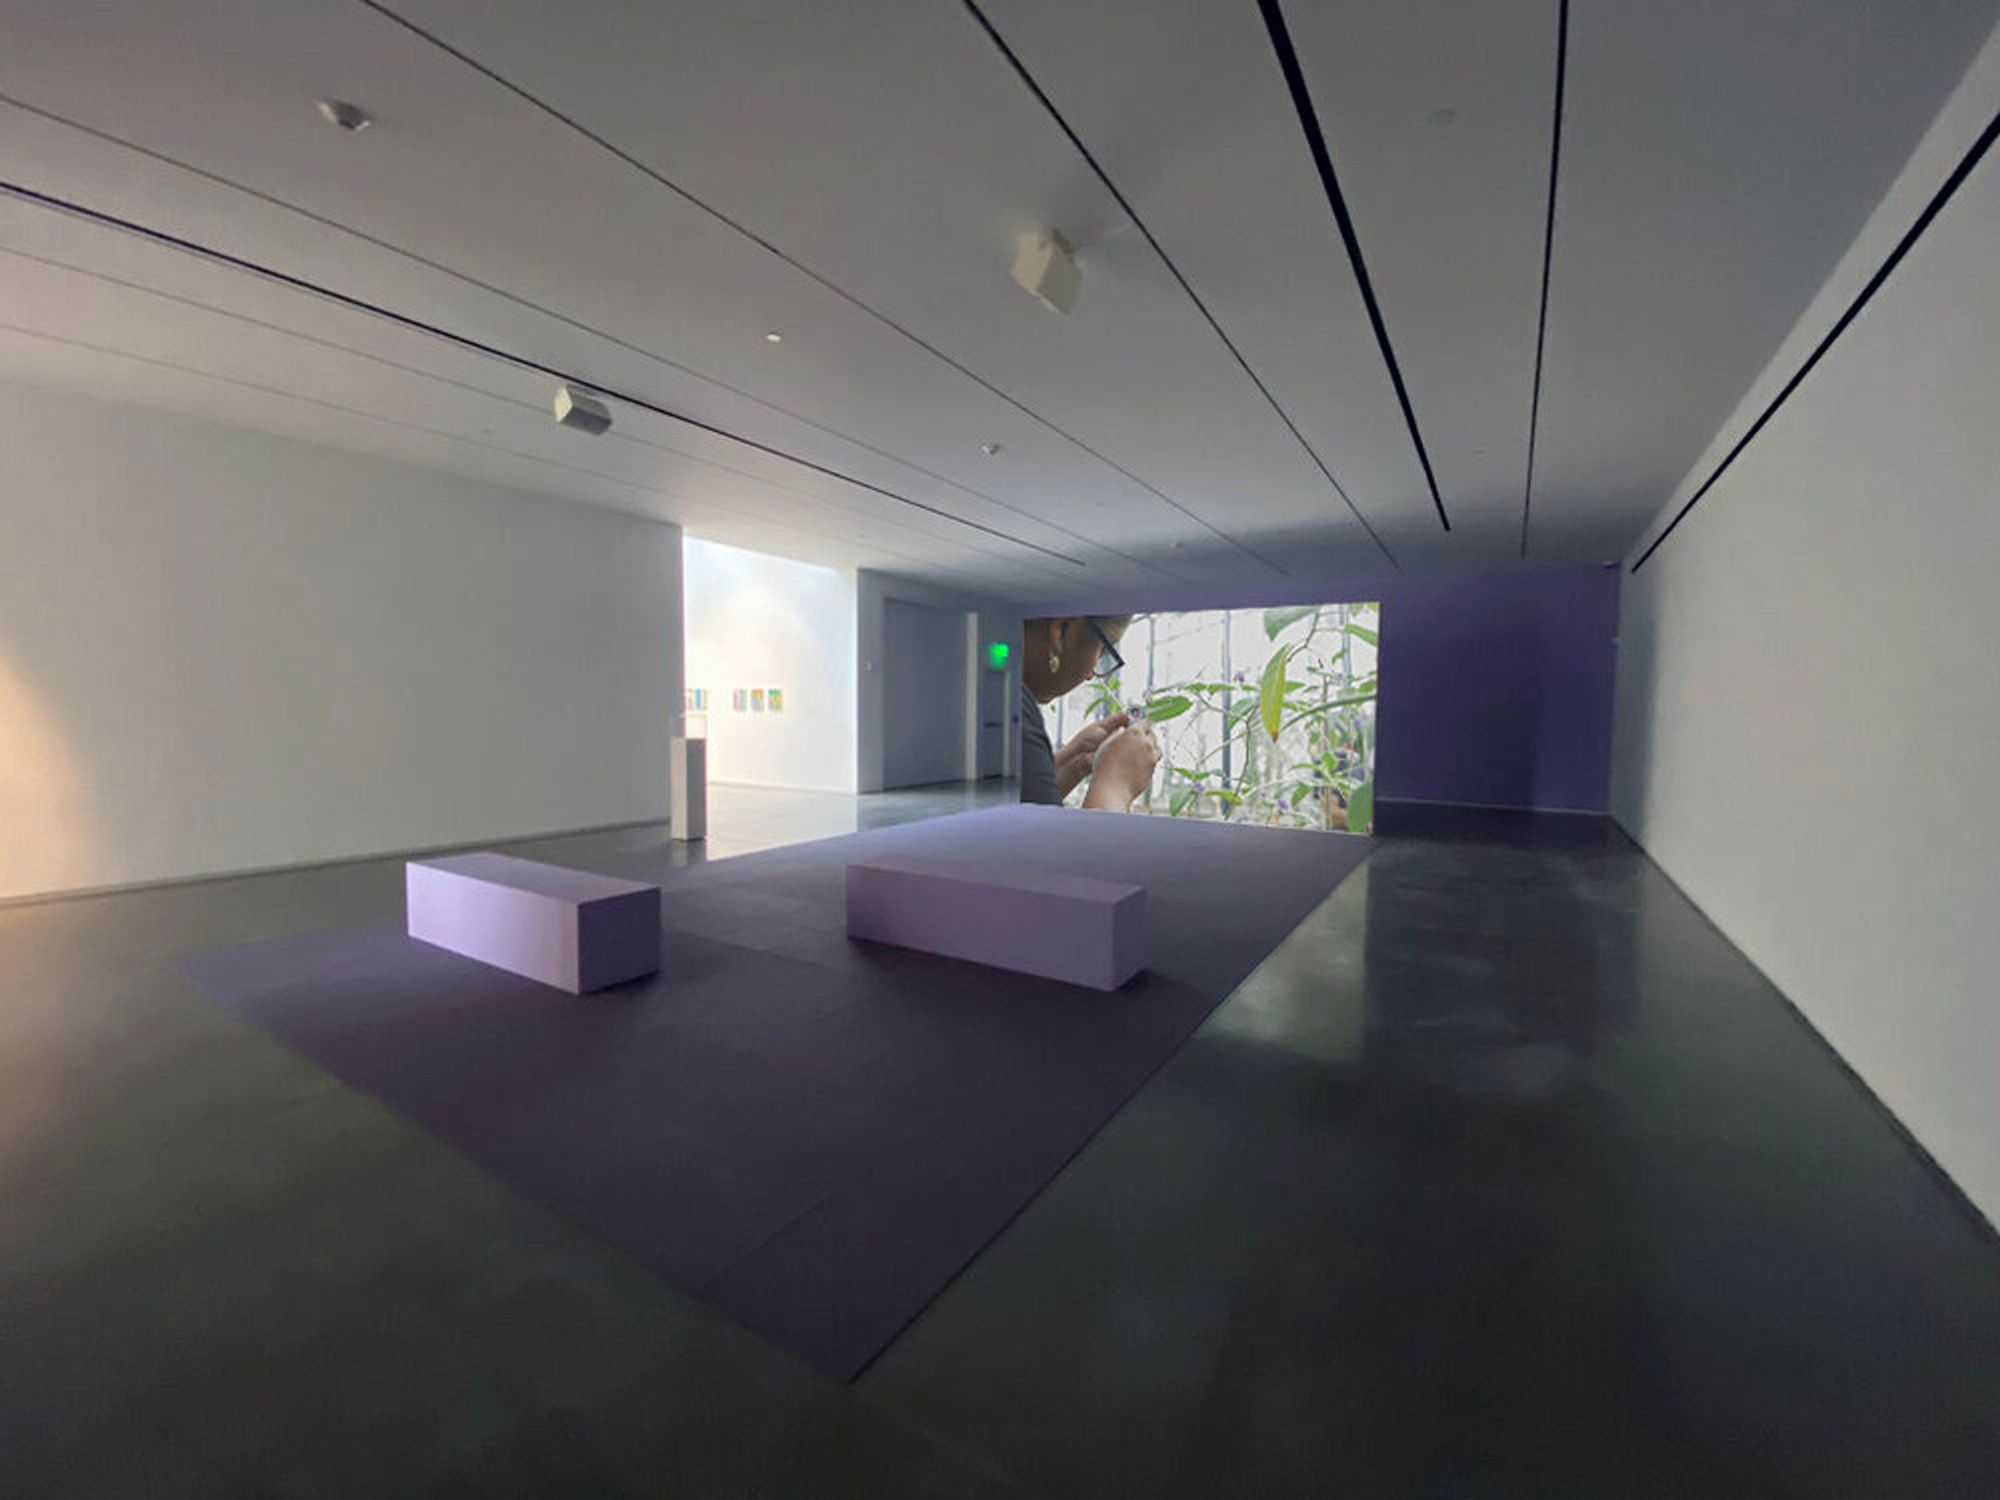 Installation view of There are things in this world that are yet to be named (2020), from the exhibition Unnamed for Decades, Center for Maine Contemporary Art.